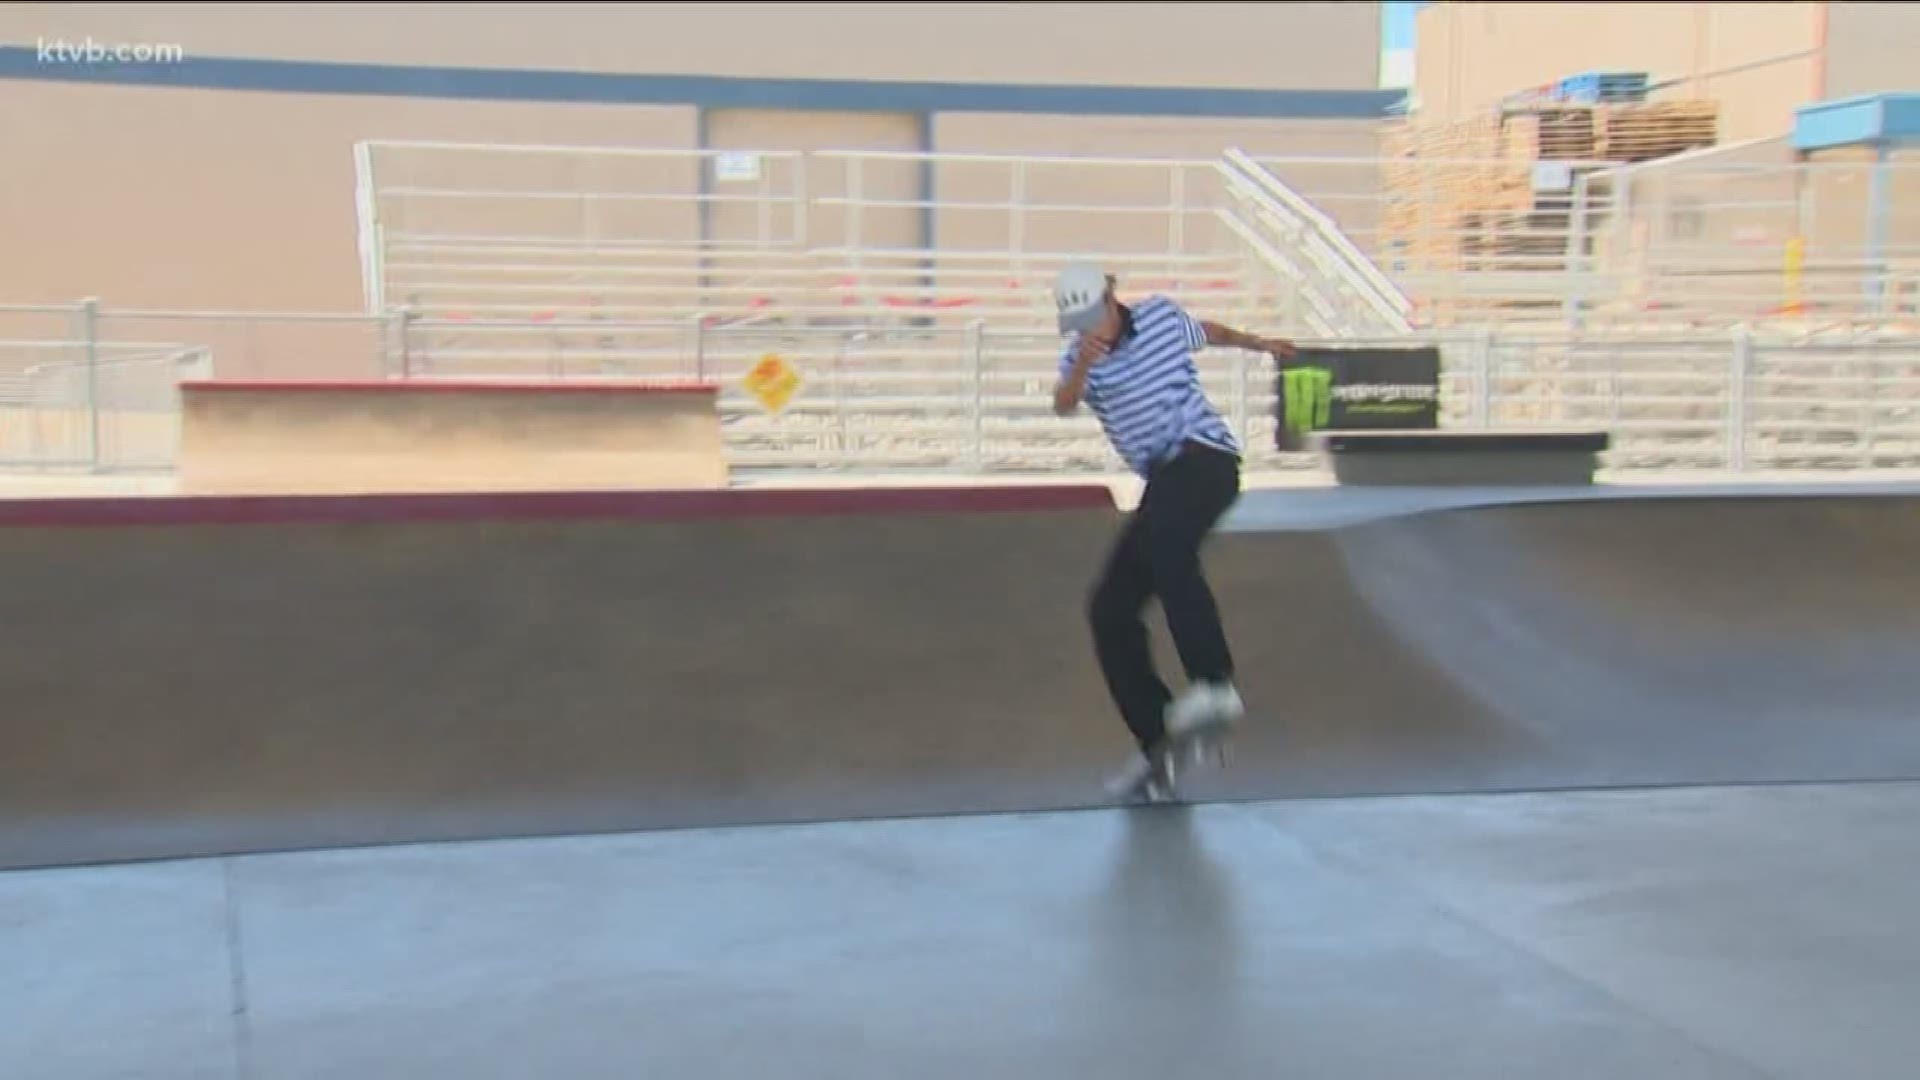 Boise will host the qualifier event at Rhodes Skate Park.